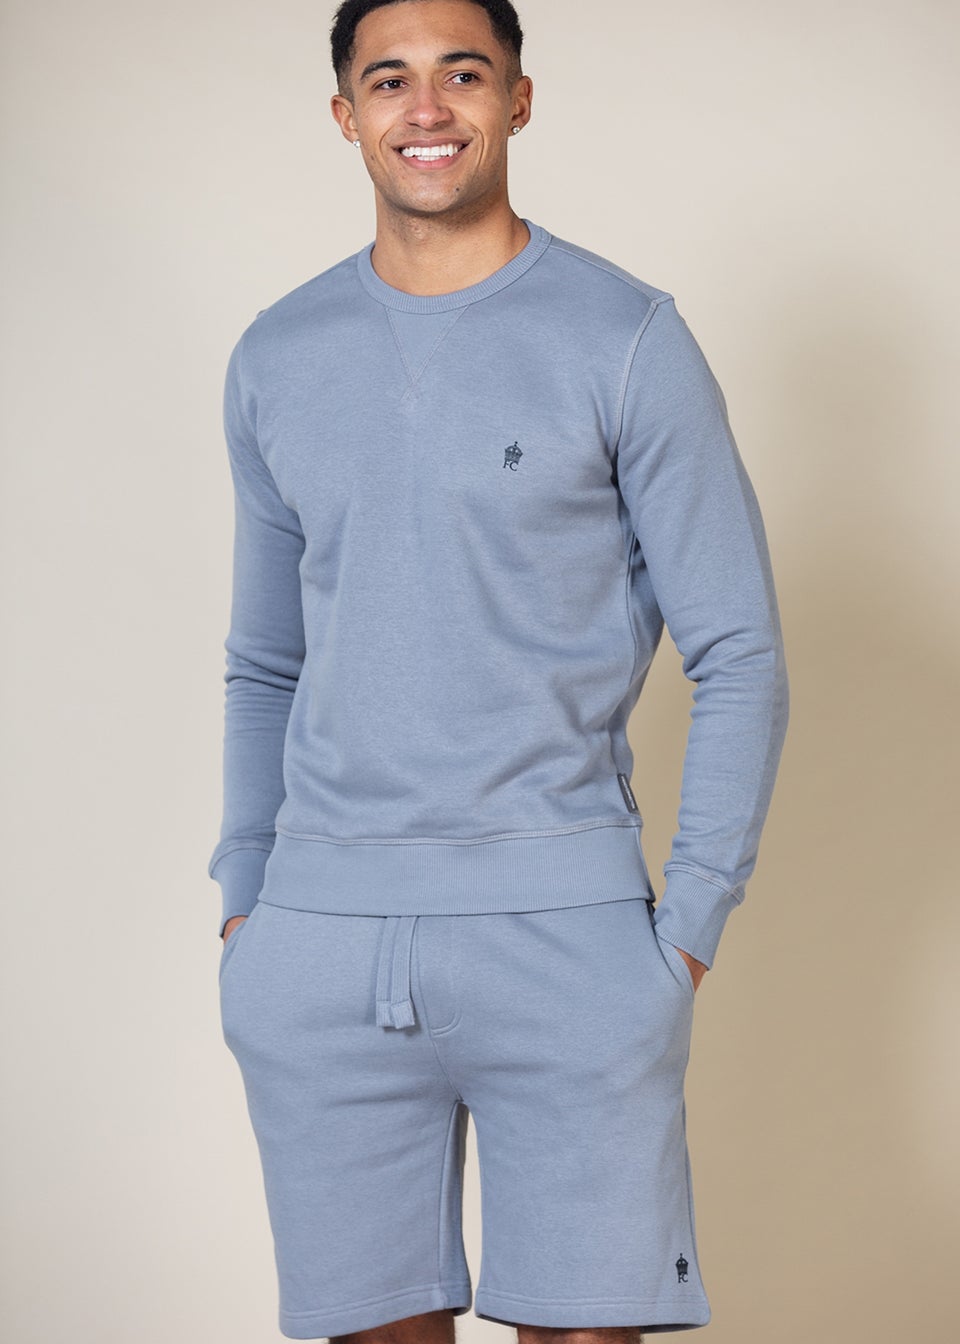 French Connection Blue Cotton Blend Sweatshirt and Short Set